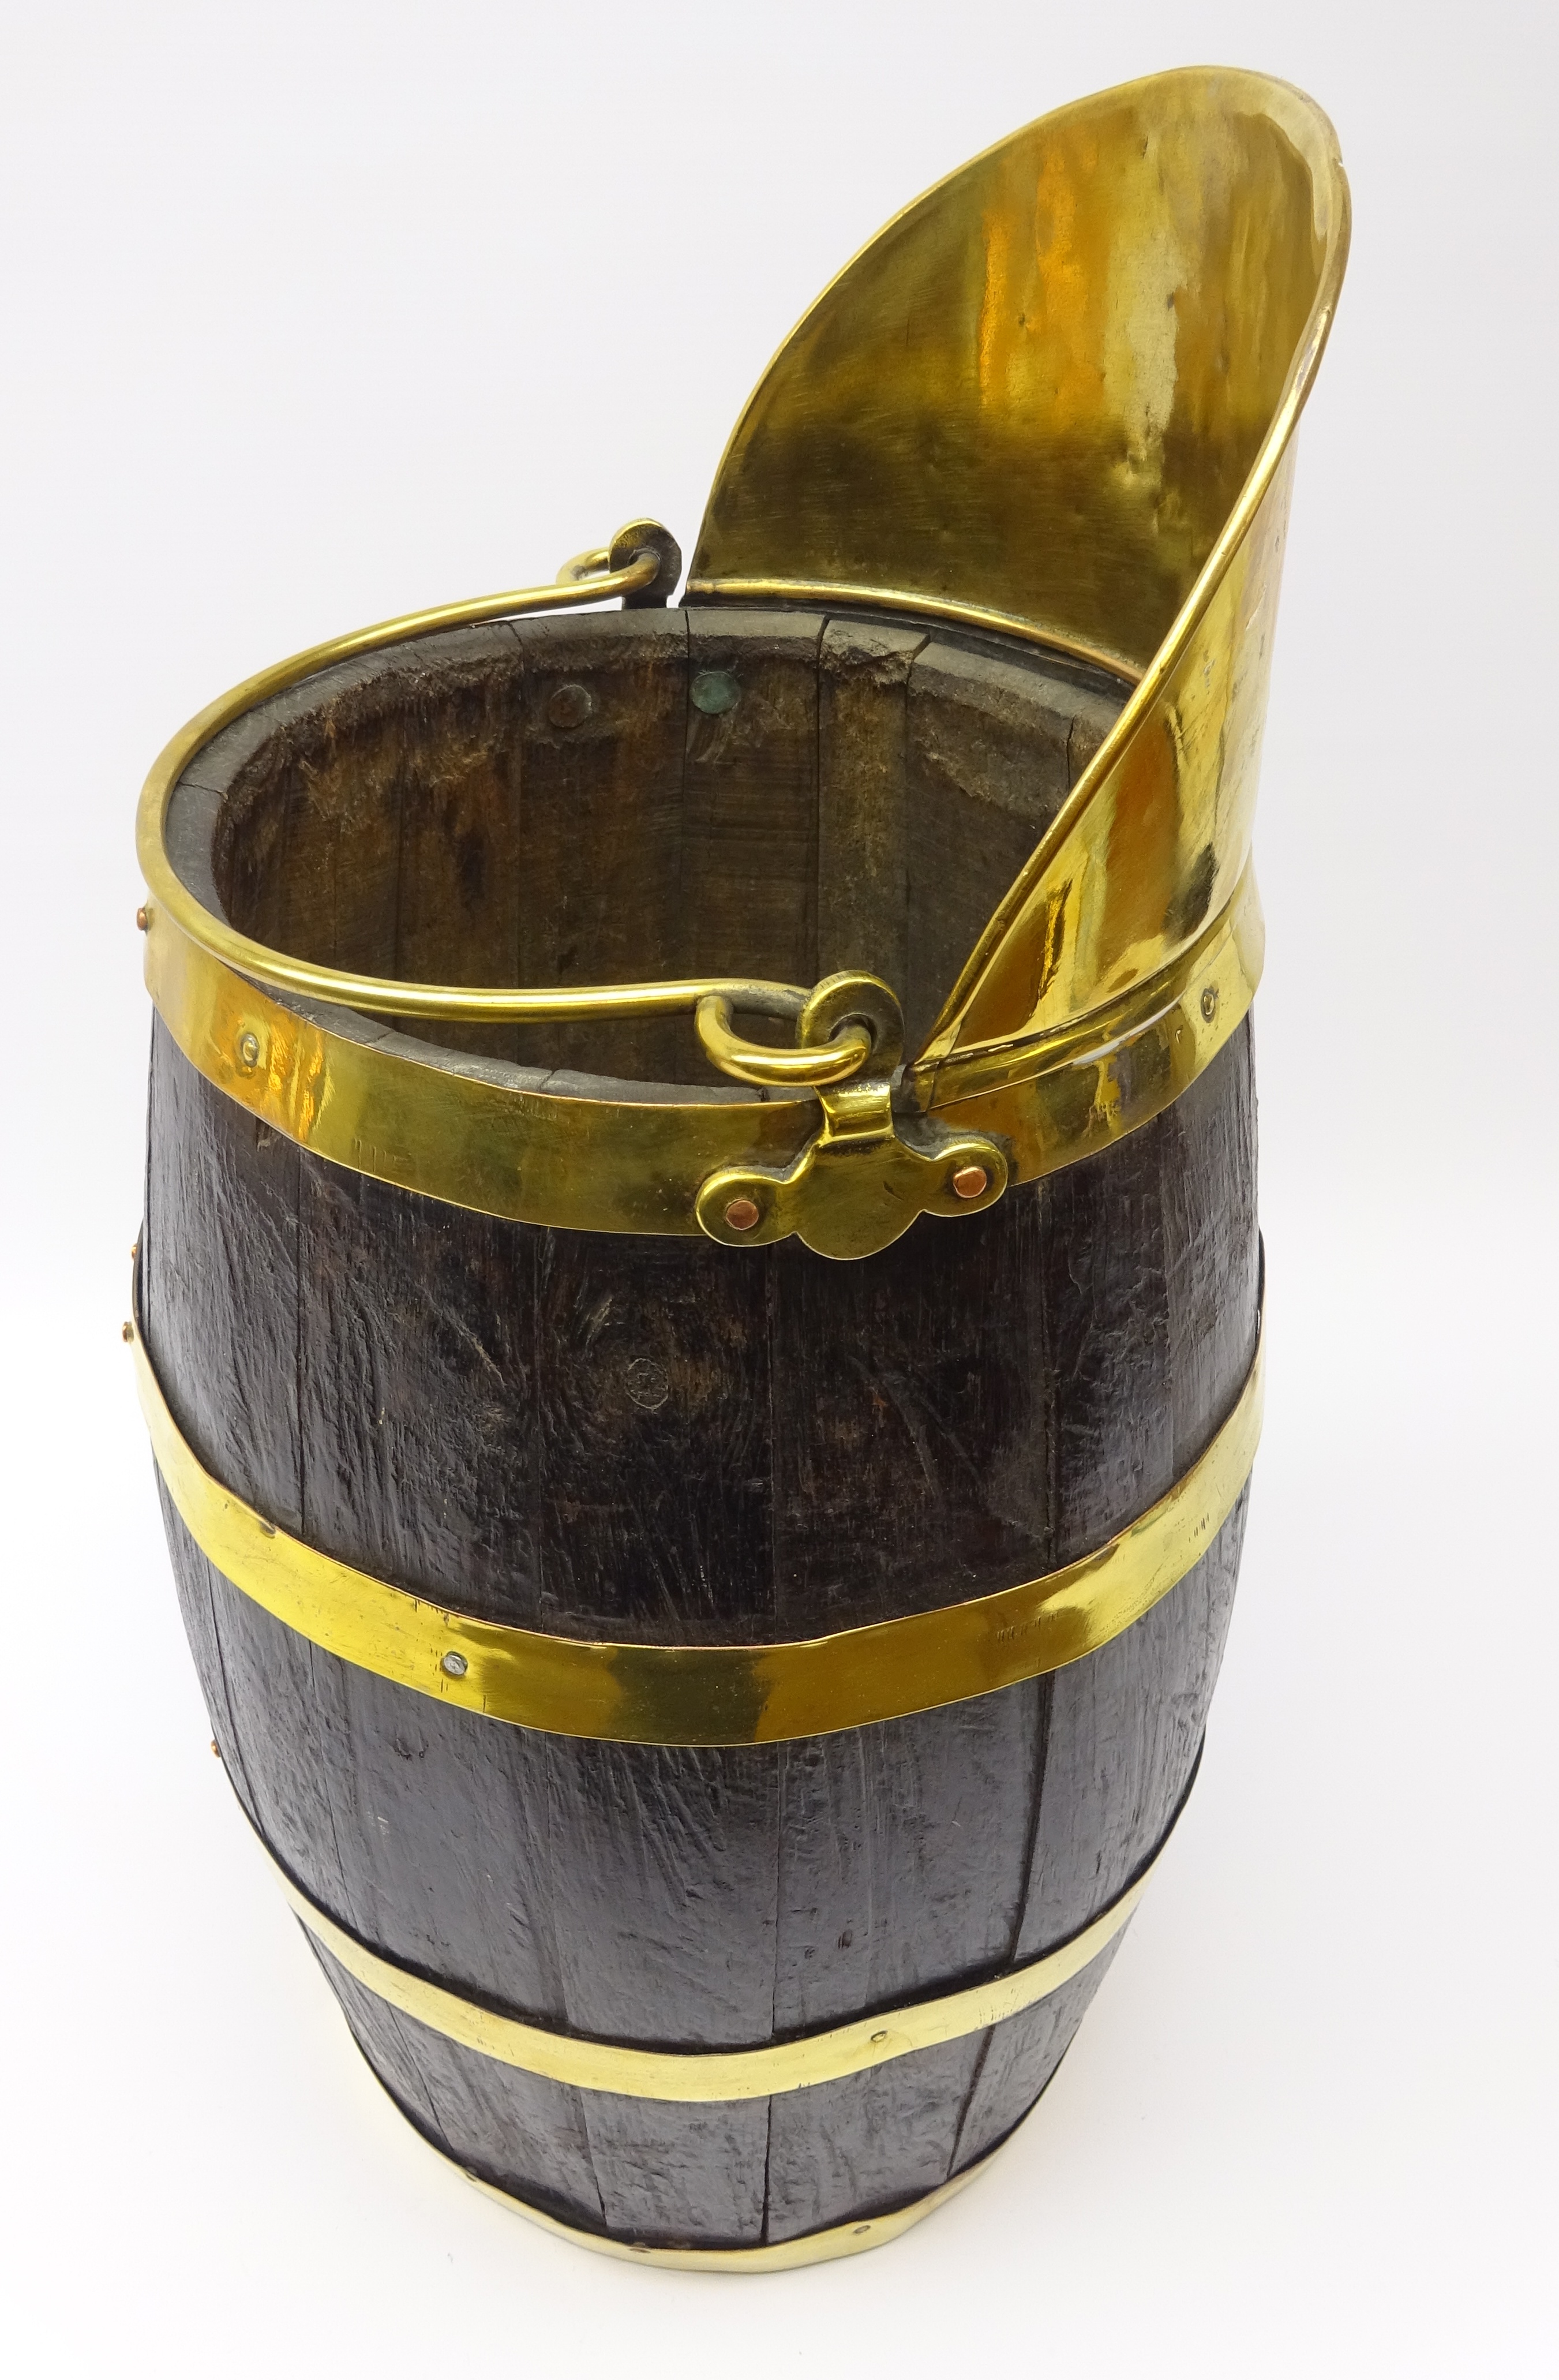 Early 20th century brass coopered oak coal barrel with brass swing handle and spout, - Image 2 of 3